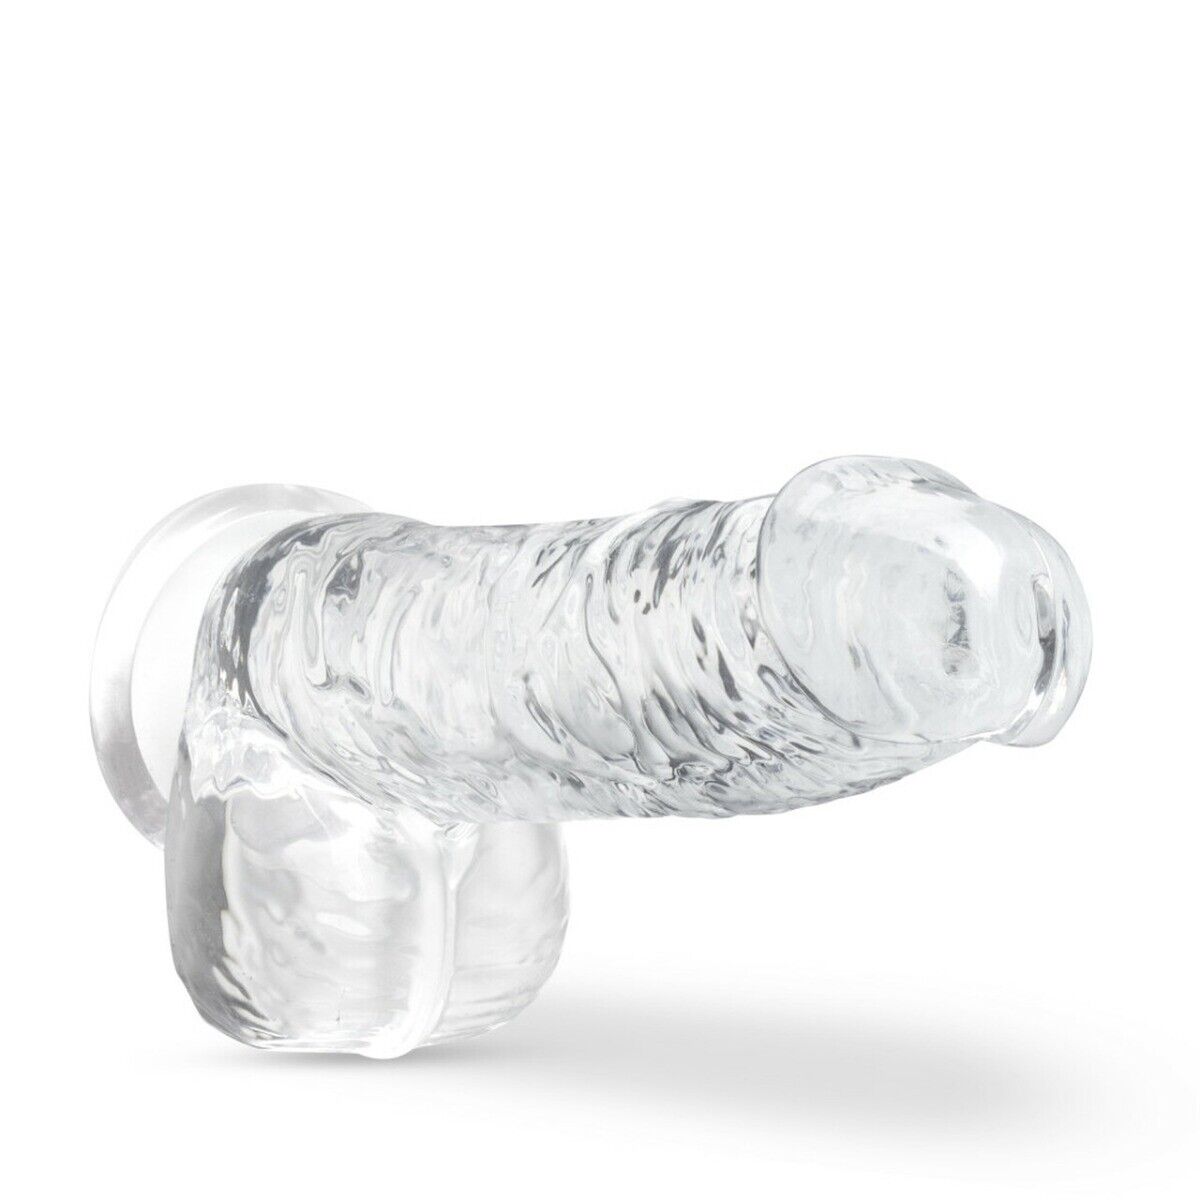 Beginner Realistic Jelly G-spot Anal Dildo Dong Cock with Balls and Suction Cup